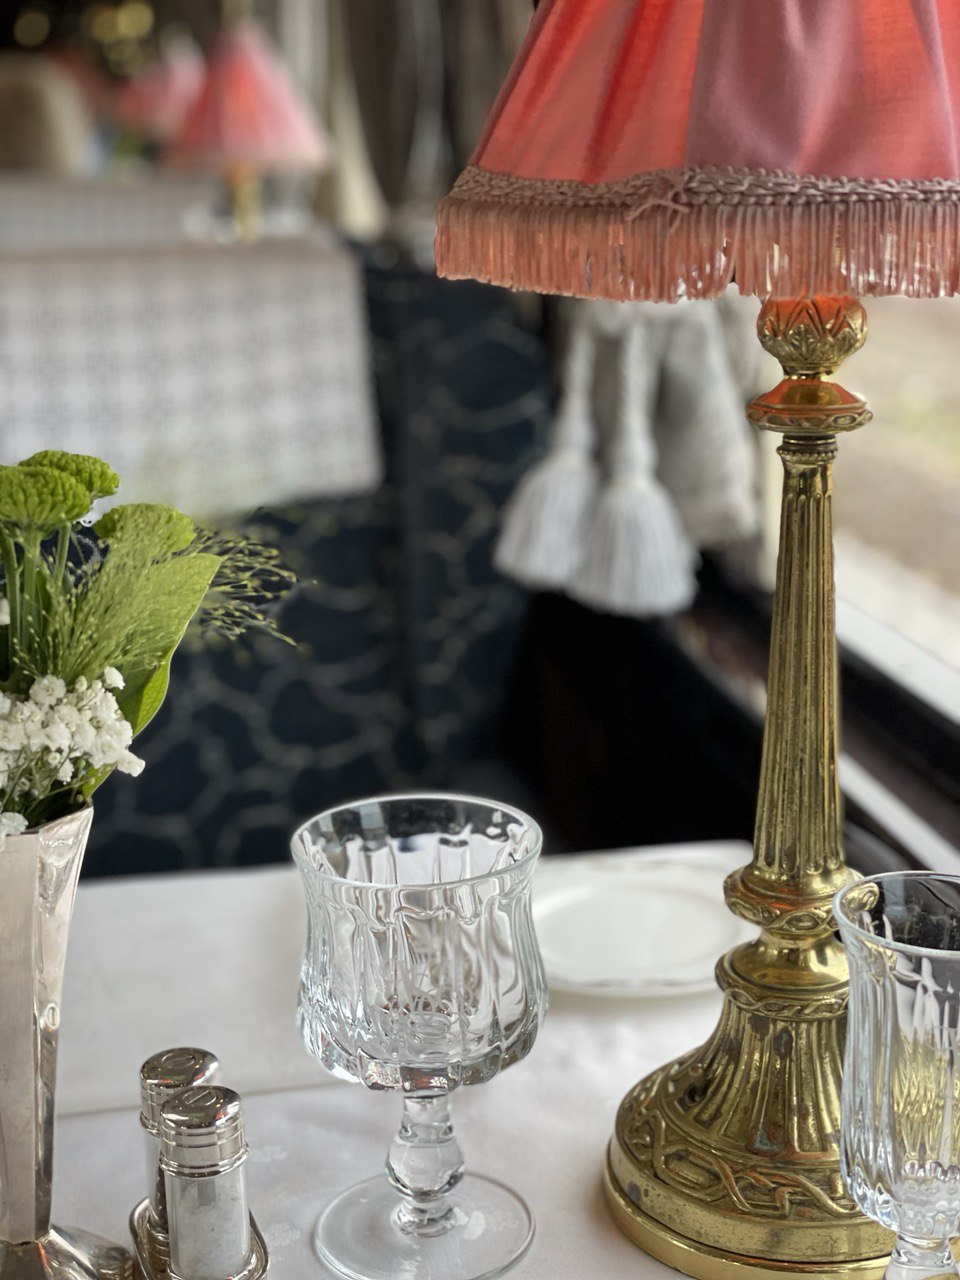 Dining at the Cote d’ azur carriage restaurant, Orient Express